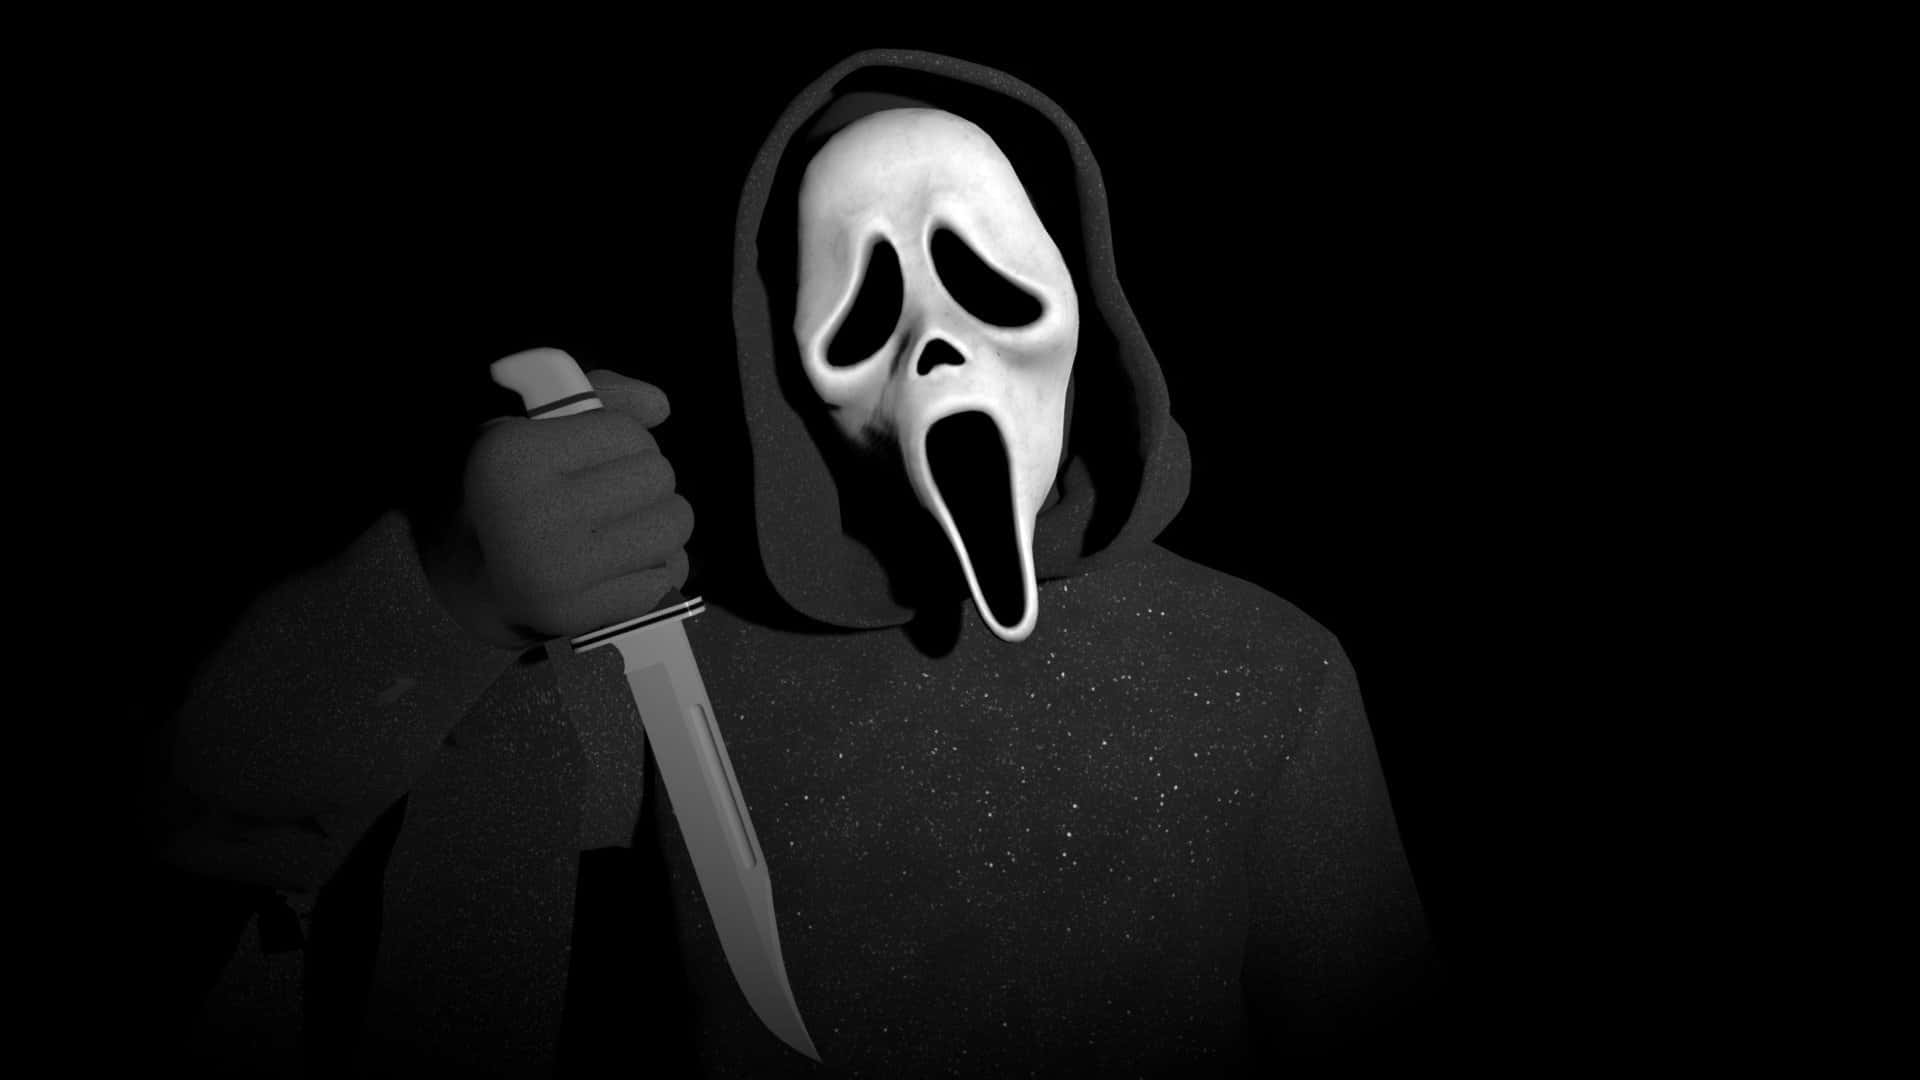 Get ready for a night of suspense and horror with Ghostface